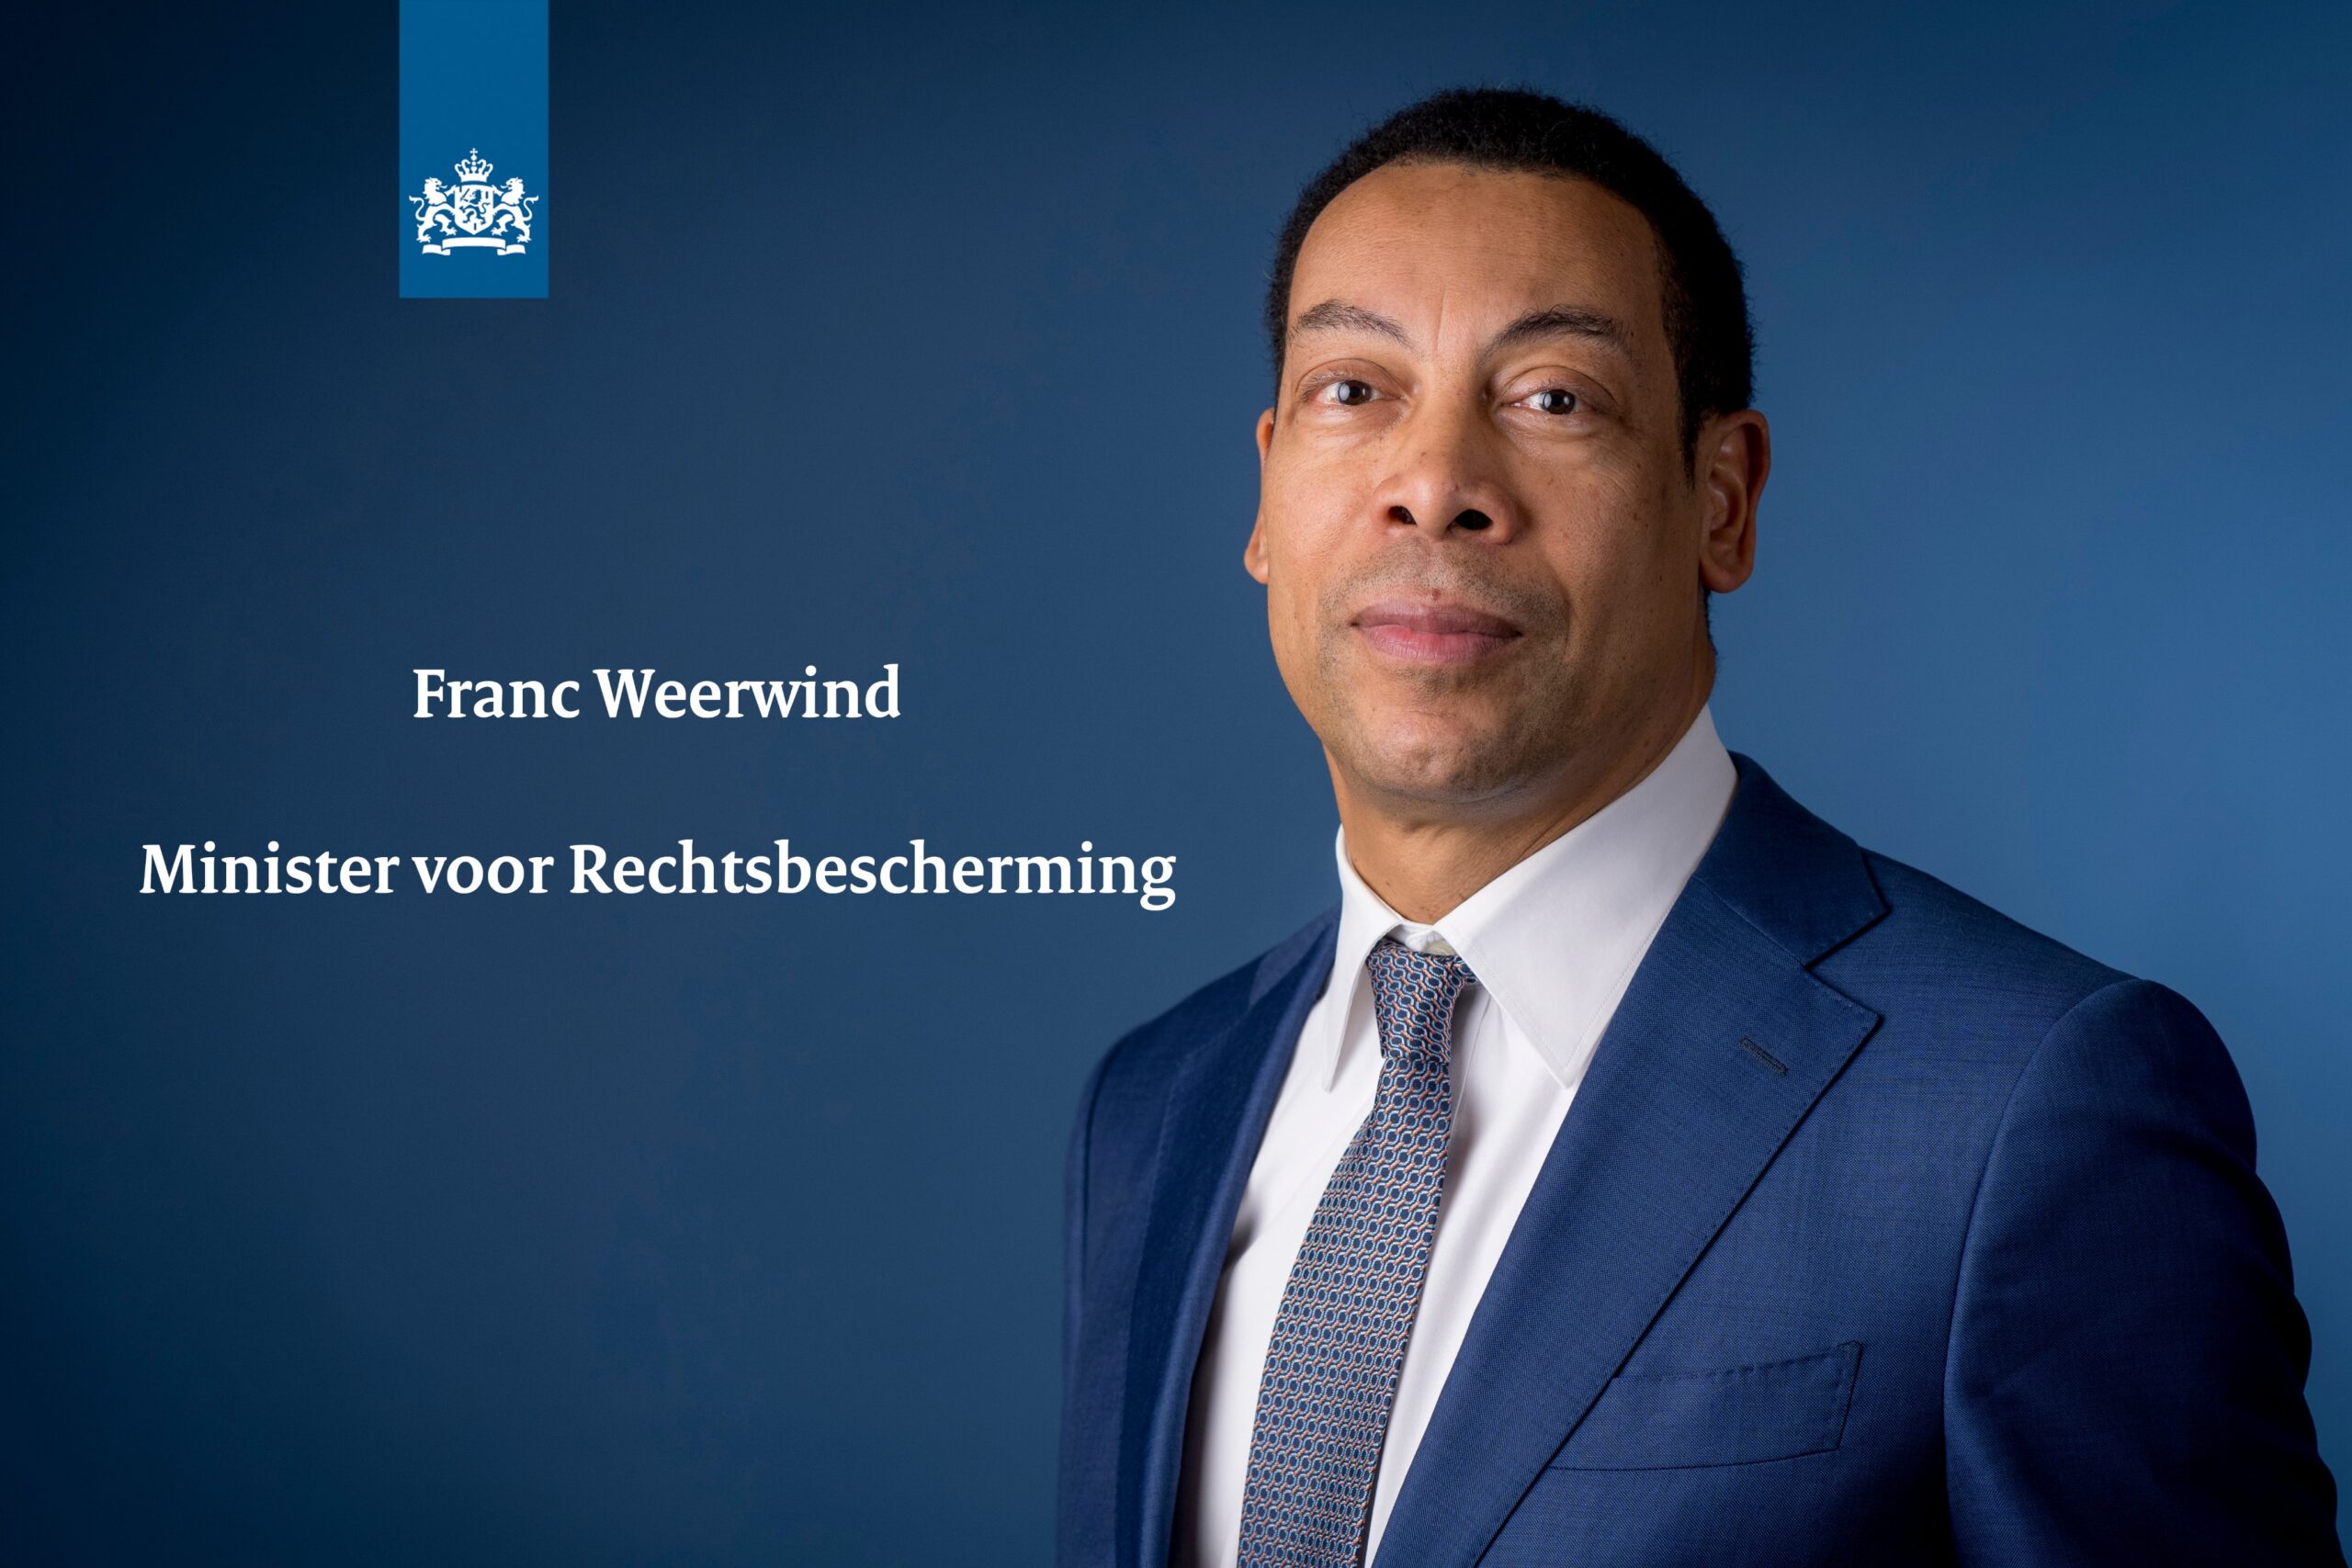 Minister Franc Weerwind